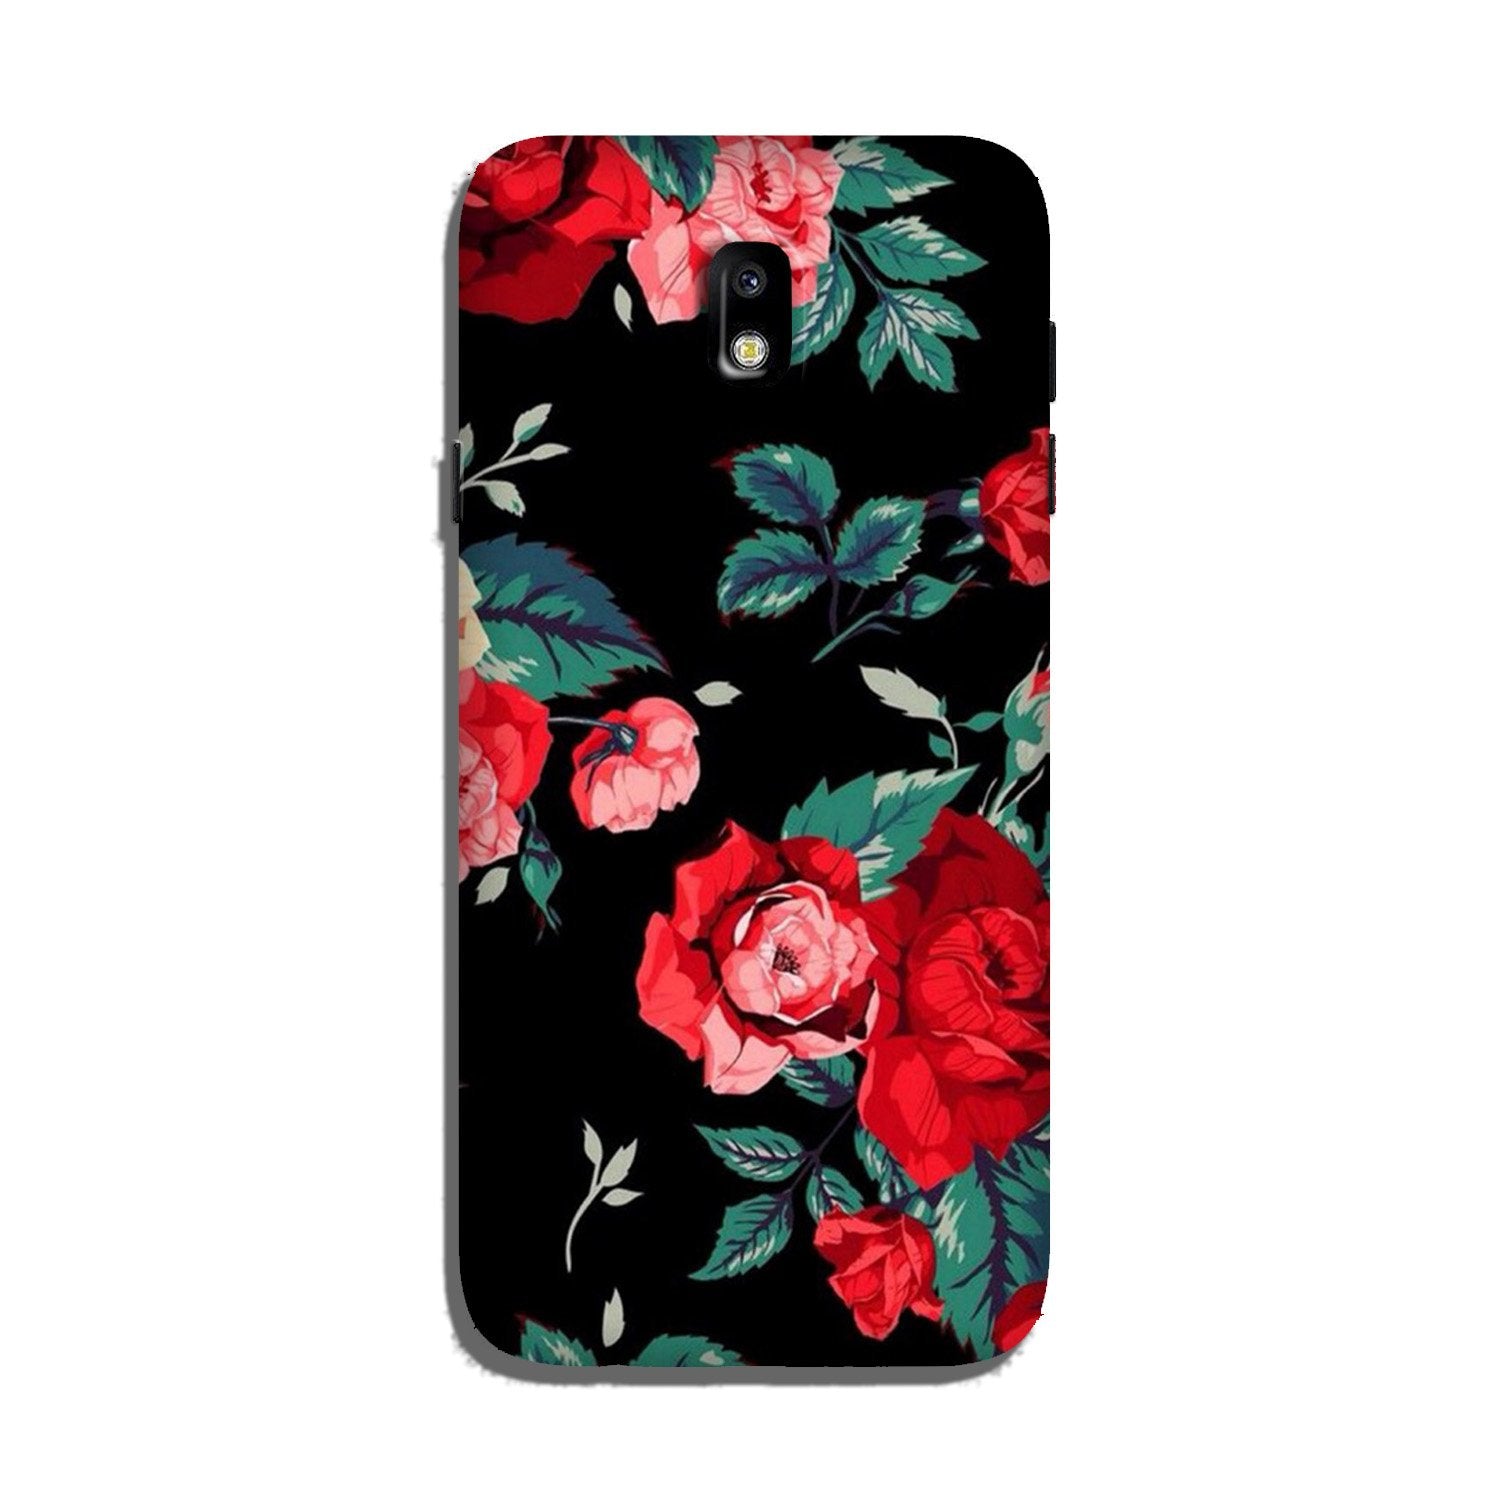 Red Rose2 Case for Galaxy J3 Pro